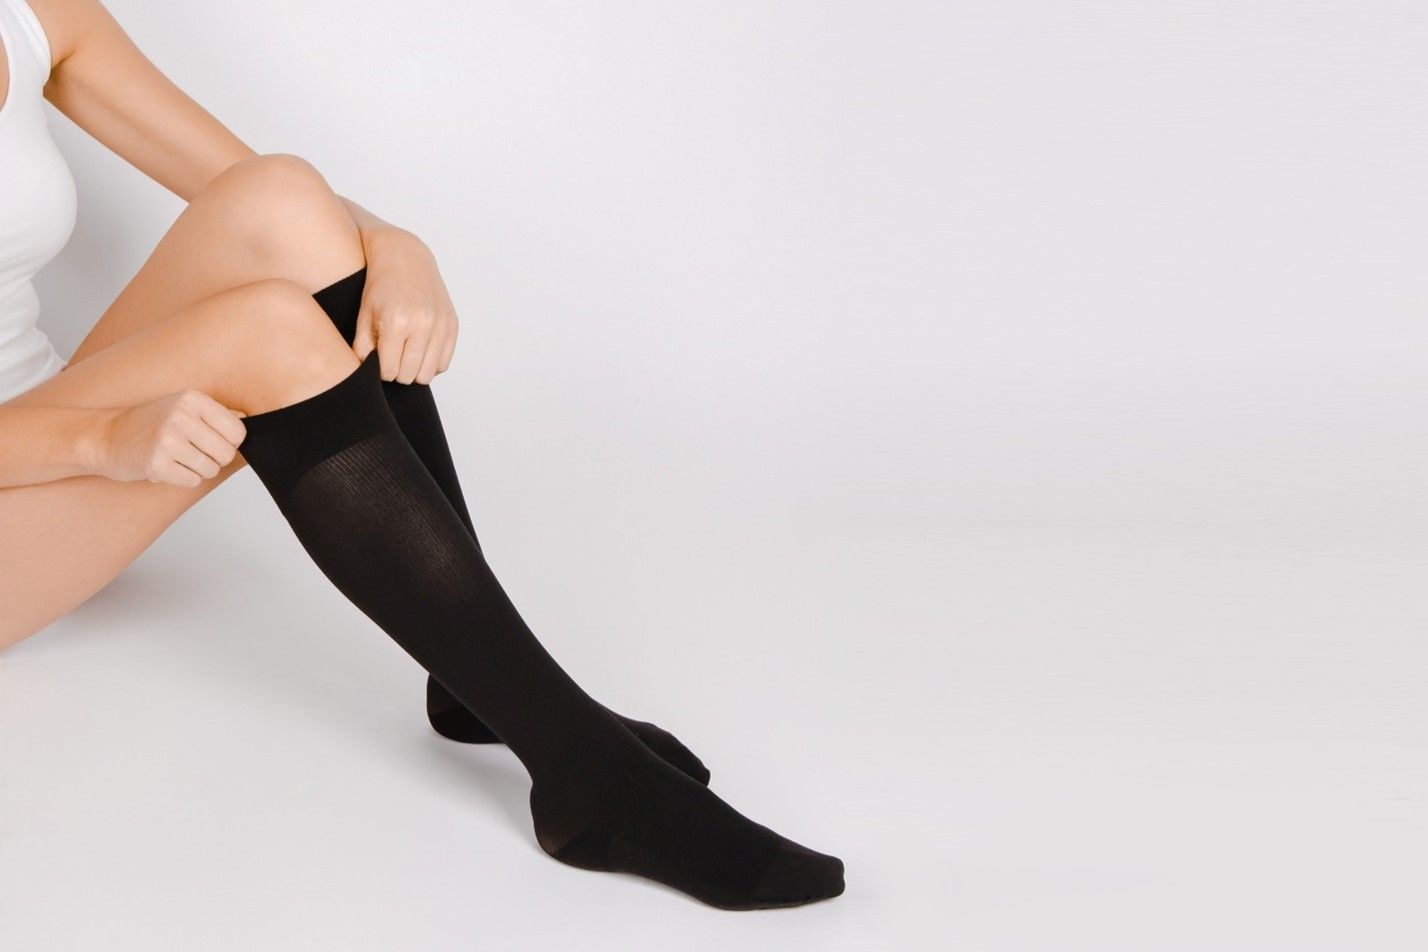 Woman pulling up a pair of black compression socks